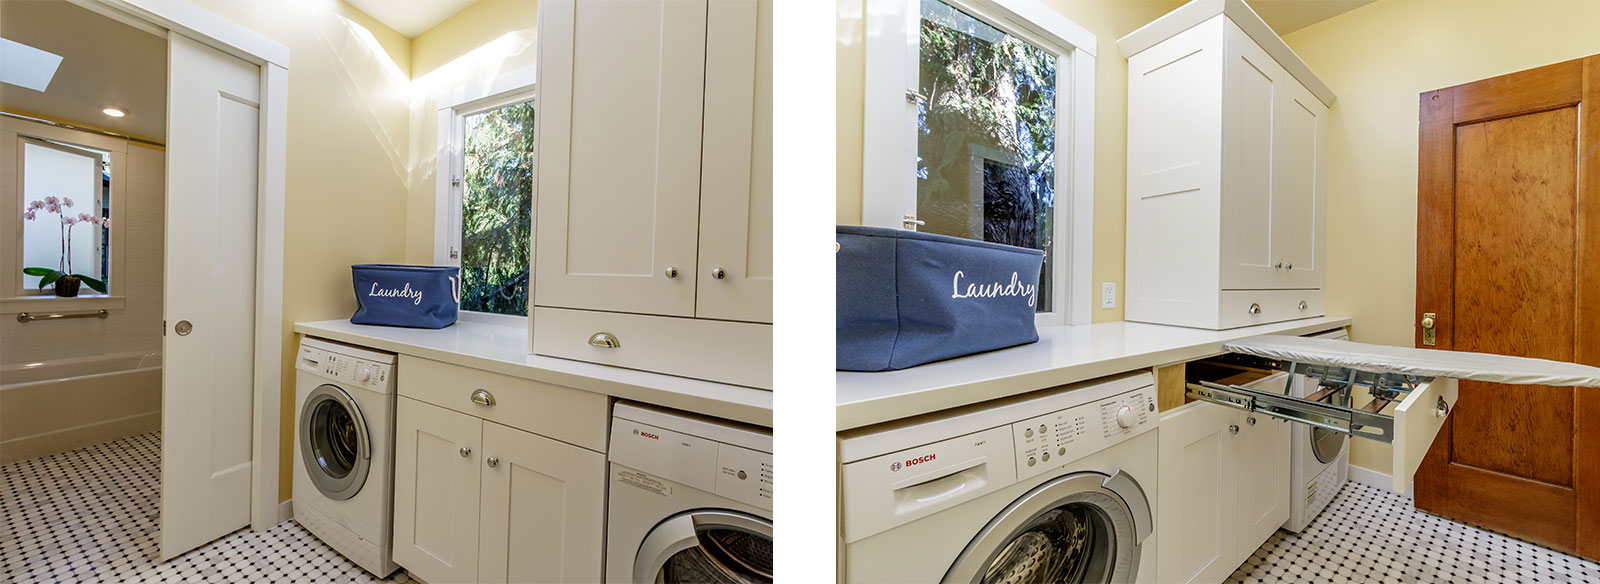 Custom, Clean, and Clever Laundry Room Ideas - Home Remodeling - Harmoni Cabinetry - Custom Kitchens